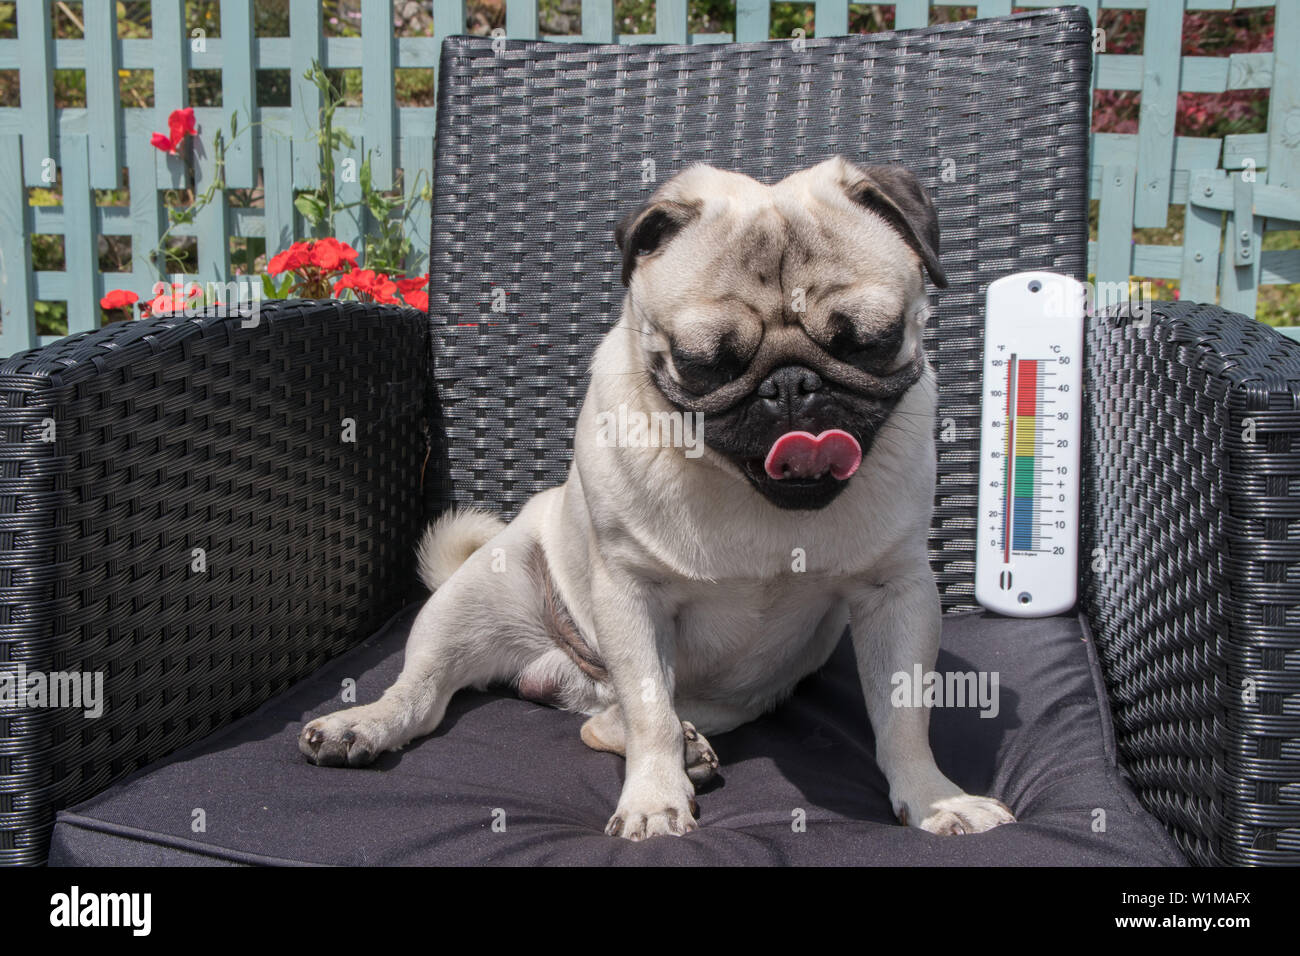 Pug dog sitting on chair, wearing sunglasses, panting,  in hot weather with a thermometer in the background. Stock Photo